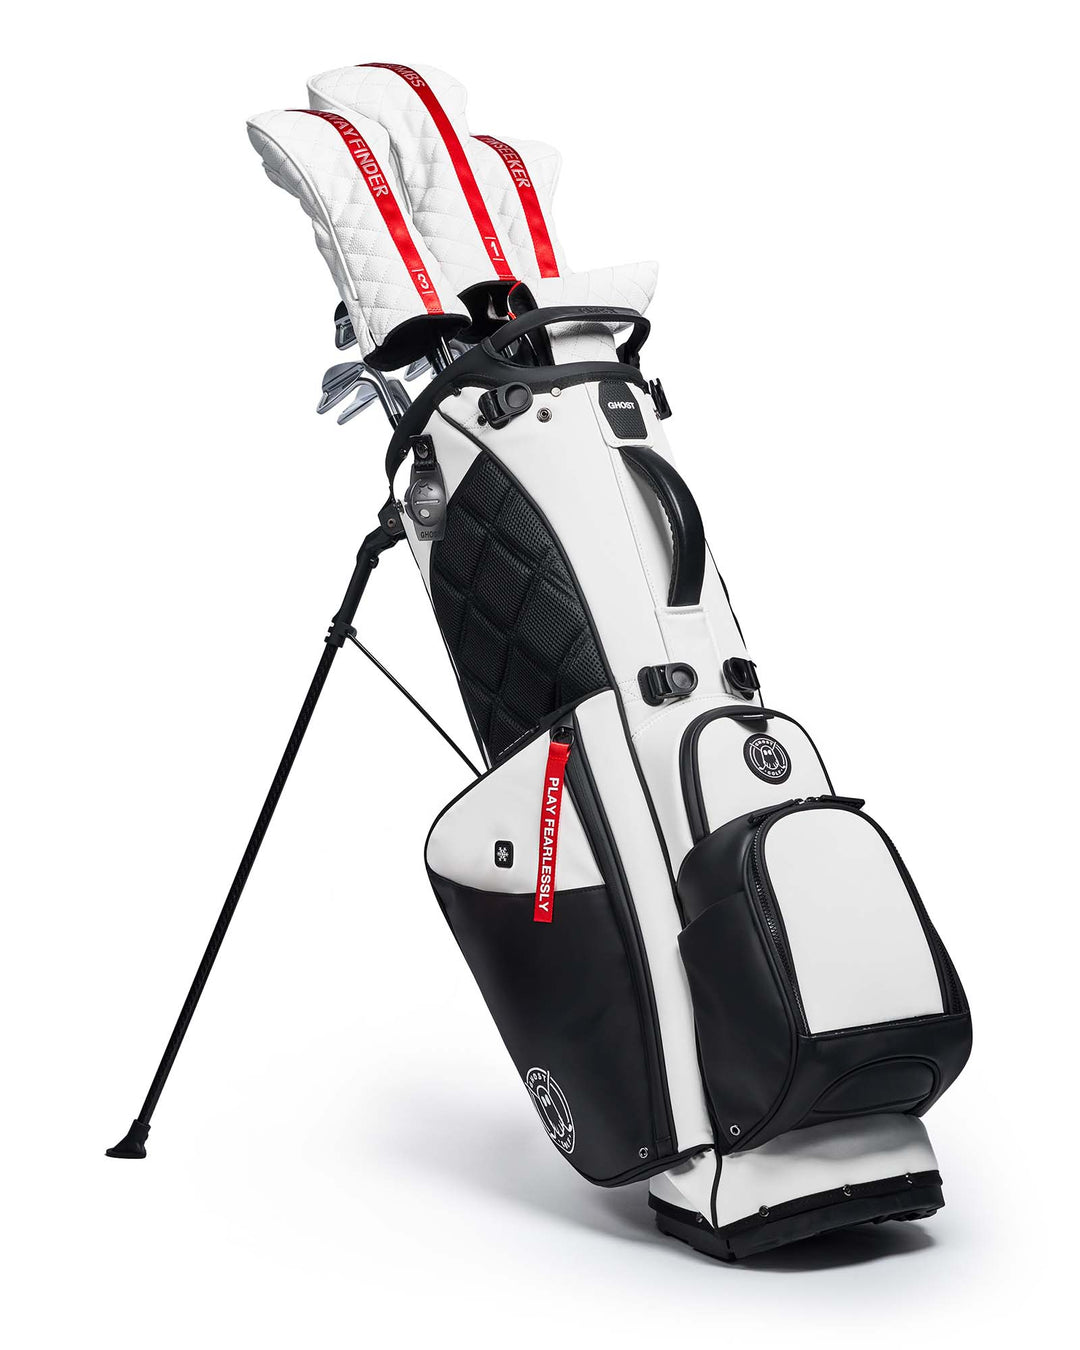 Ghost Golf OREO Black and White Leather Golf Bag with Red Tags. Golf Clubs with White and Red Stripe HEad Covers.